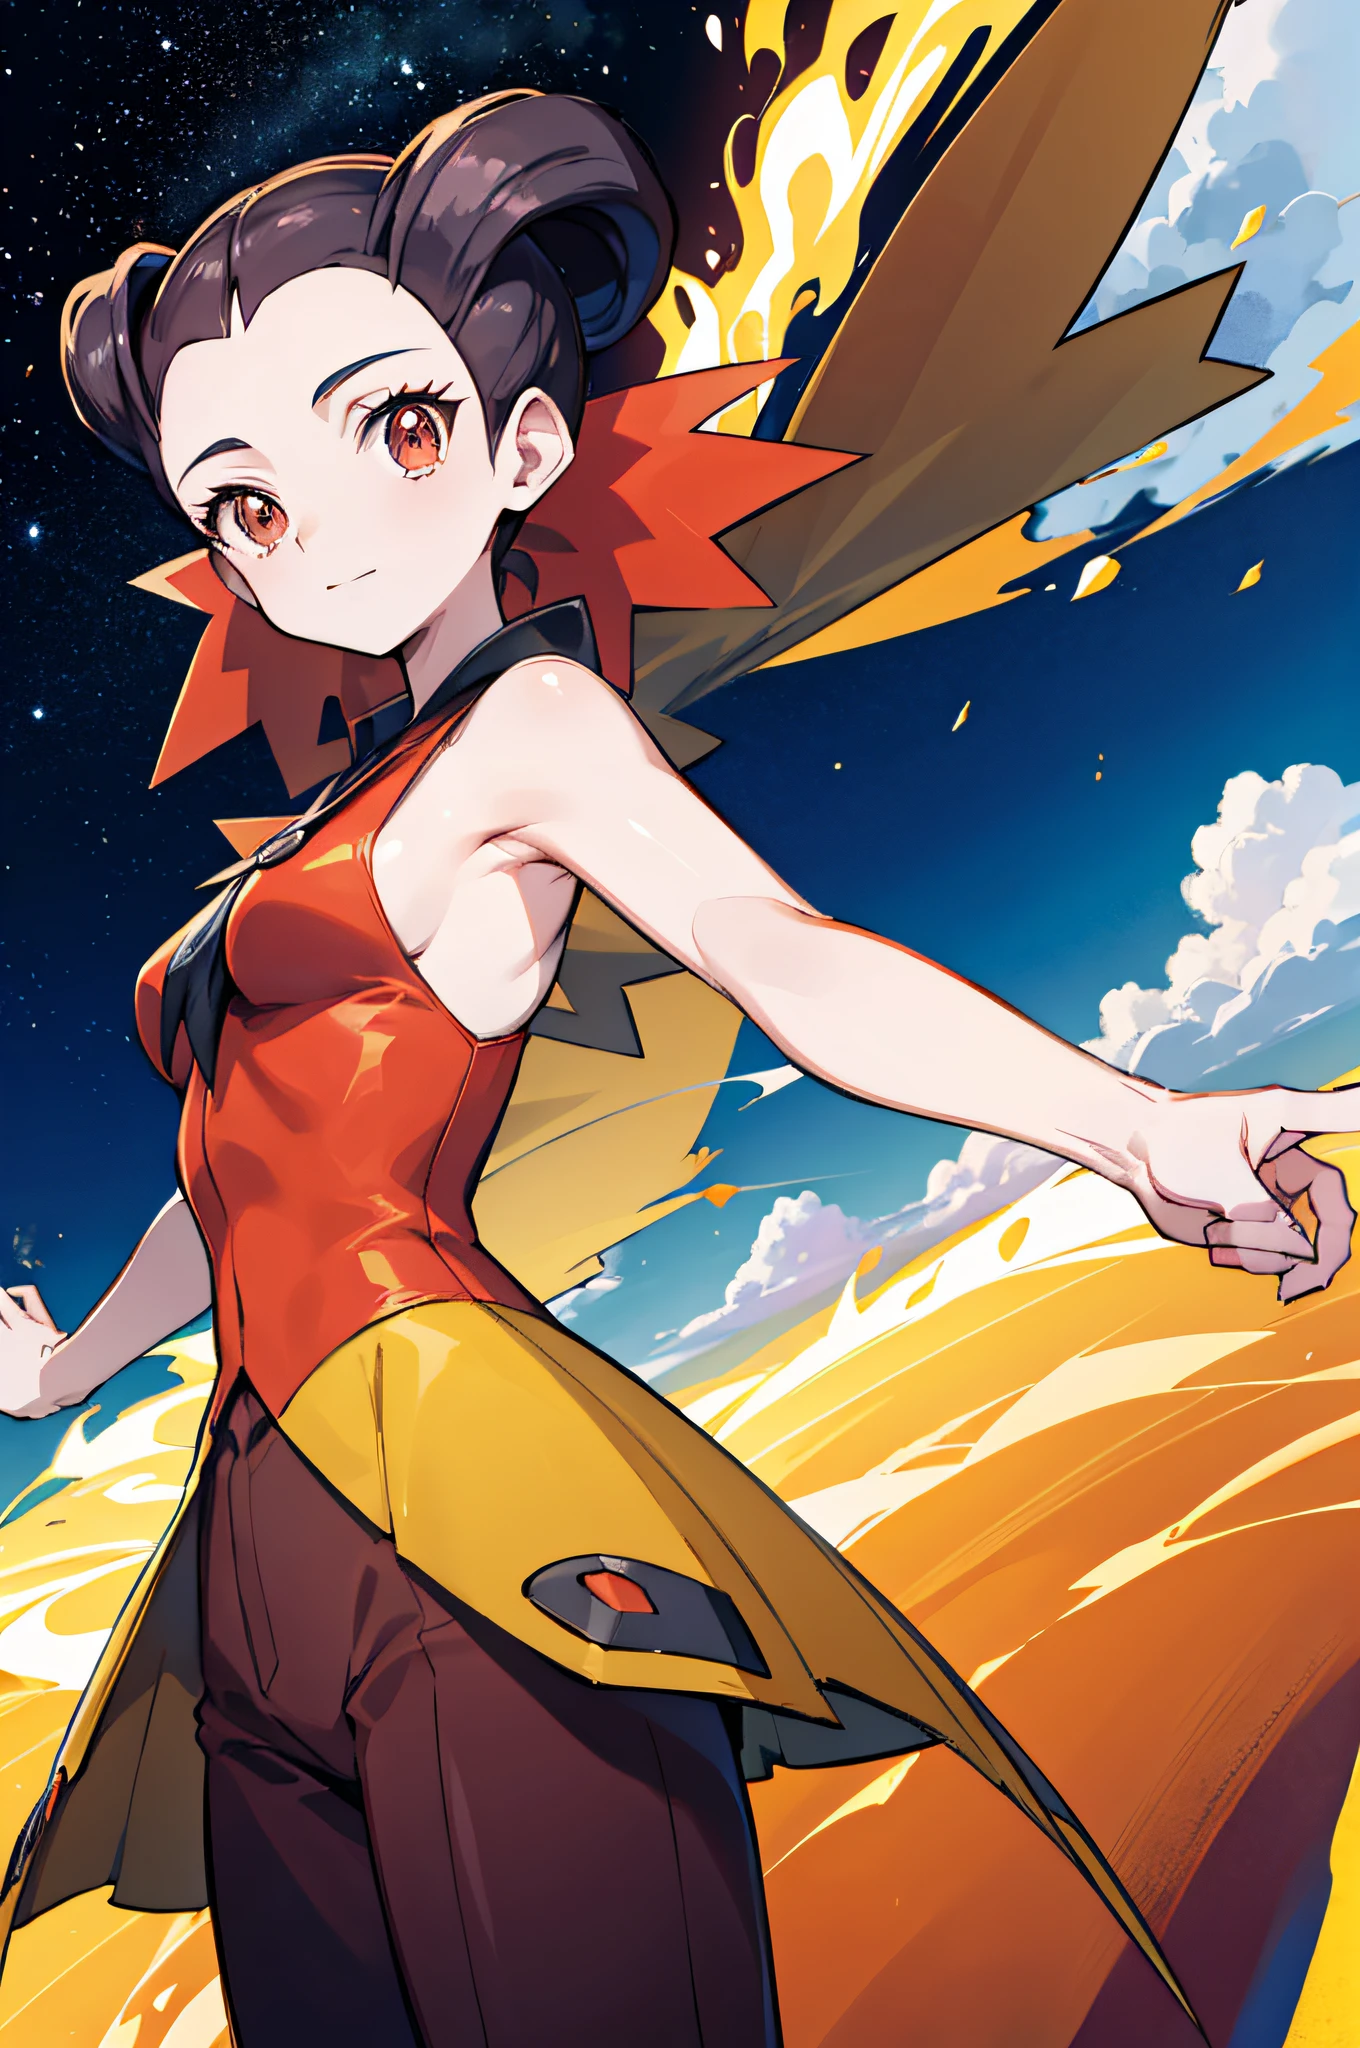 anime styling, The environment filled with fire, Playing with Pokémon , roxanne( charachter) is in a standard outfit, long hair, cor parda, orange eyes, Grinning, ultrarealistic, fully body, 2d